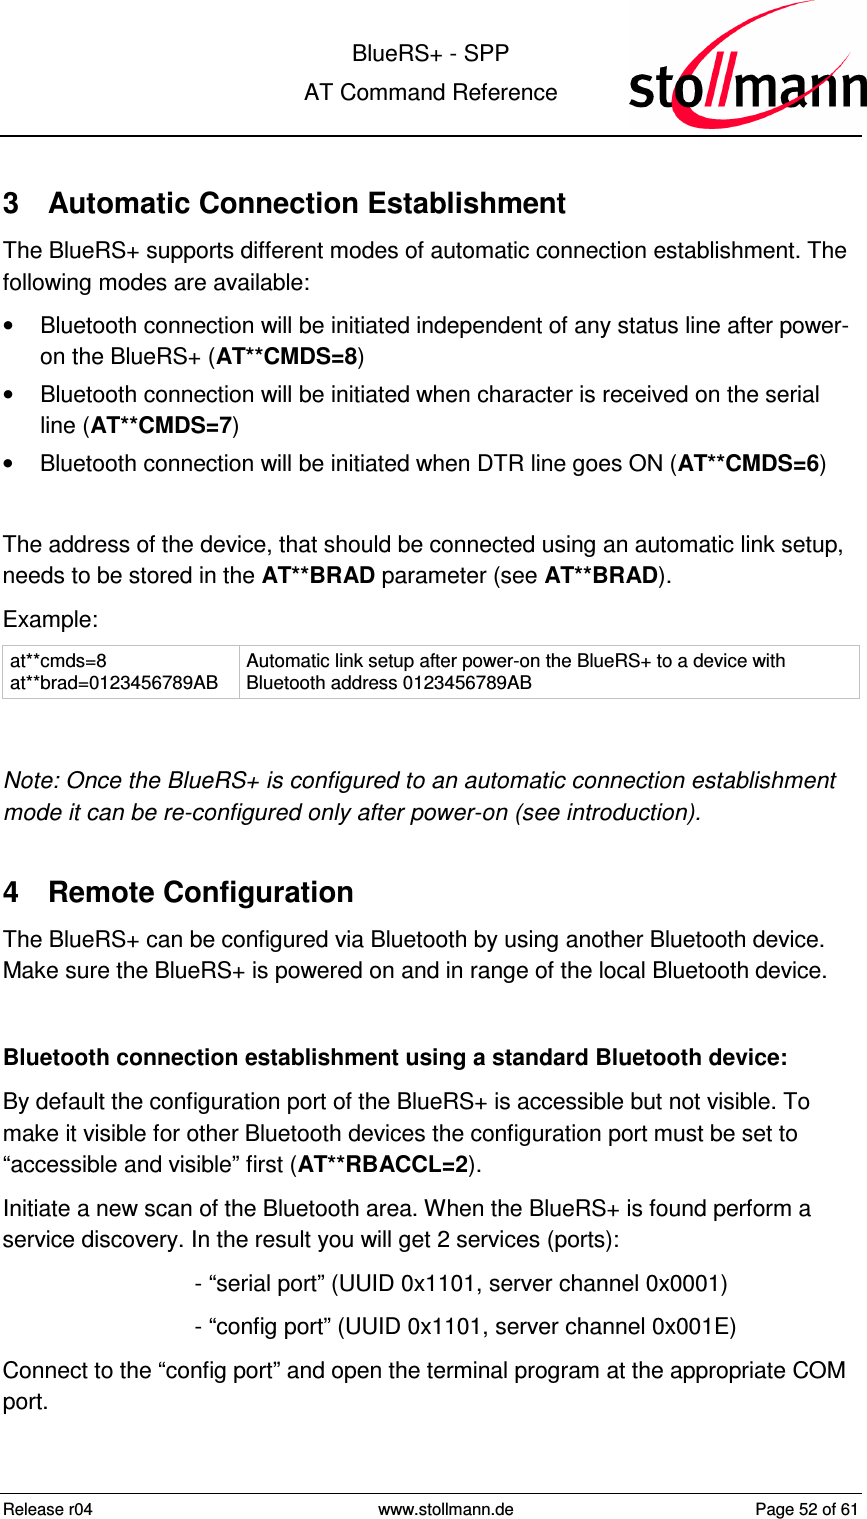  BlueRS+ - SPP AT Command Reference Release r04  www.stollmann.de  Page 52 of 61  3  Automatic Connection Establishment The BlueRS+ supports different modes of automatic connection establishment. The following modes are available: •  Bluetooth connection will be initiated independent of any status line after power-on the BlueRS+ (AT**CMDS=8) •  Bluetooth connection will be initiated when character is received on the serial line (AT**CMDS=7) •  Bluetooth connection will be initiated when DTR line goes ON (AT**CMDS=6)  The address of the device, that should be connected using an automatic link setup, needs to be stored in the AT**BRAD parameter (see AT**BRAD). Example: at**cmds=8 at**brad=0123456789AB  Automatic link setup after power-on the BlueRS+ to a device with Bluetooth address 0123456789AB  Note: Once the BlueRS+ is configured to an automatic connection establishment mode it can be re-configured only after power-on (see introduction). 4  Remote Configuration The BlueRS+ can be configured via Bluetooth by using another Bluetooth device. Make sure the BlueRS+ is powered on and in range of the local Bluetooth device.  Bluetooth connection establishment using a standard Bluetooth device: By default the configuration port of the BlueRS+ is accessible but not visible. To make it visible for other Bluetooth devices the configuration port must be set to “accessible and visible” first (AT**RBACCL=2).  Initiate a new scan of the Bluetooth area. When the BlueRS+ is found perform a service discovery. In the result you will get 2 services (ports): - “serial port” (UUID 0x1101, server channel 0x0001) - “config port” (UUID 0x1101, server channel 0x001E) Connect to the “config port” and open the terminal program at the appropriate COM port.  